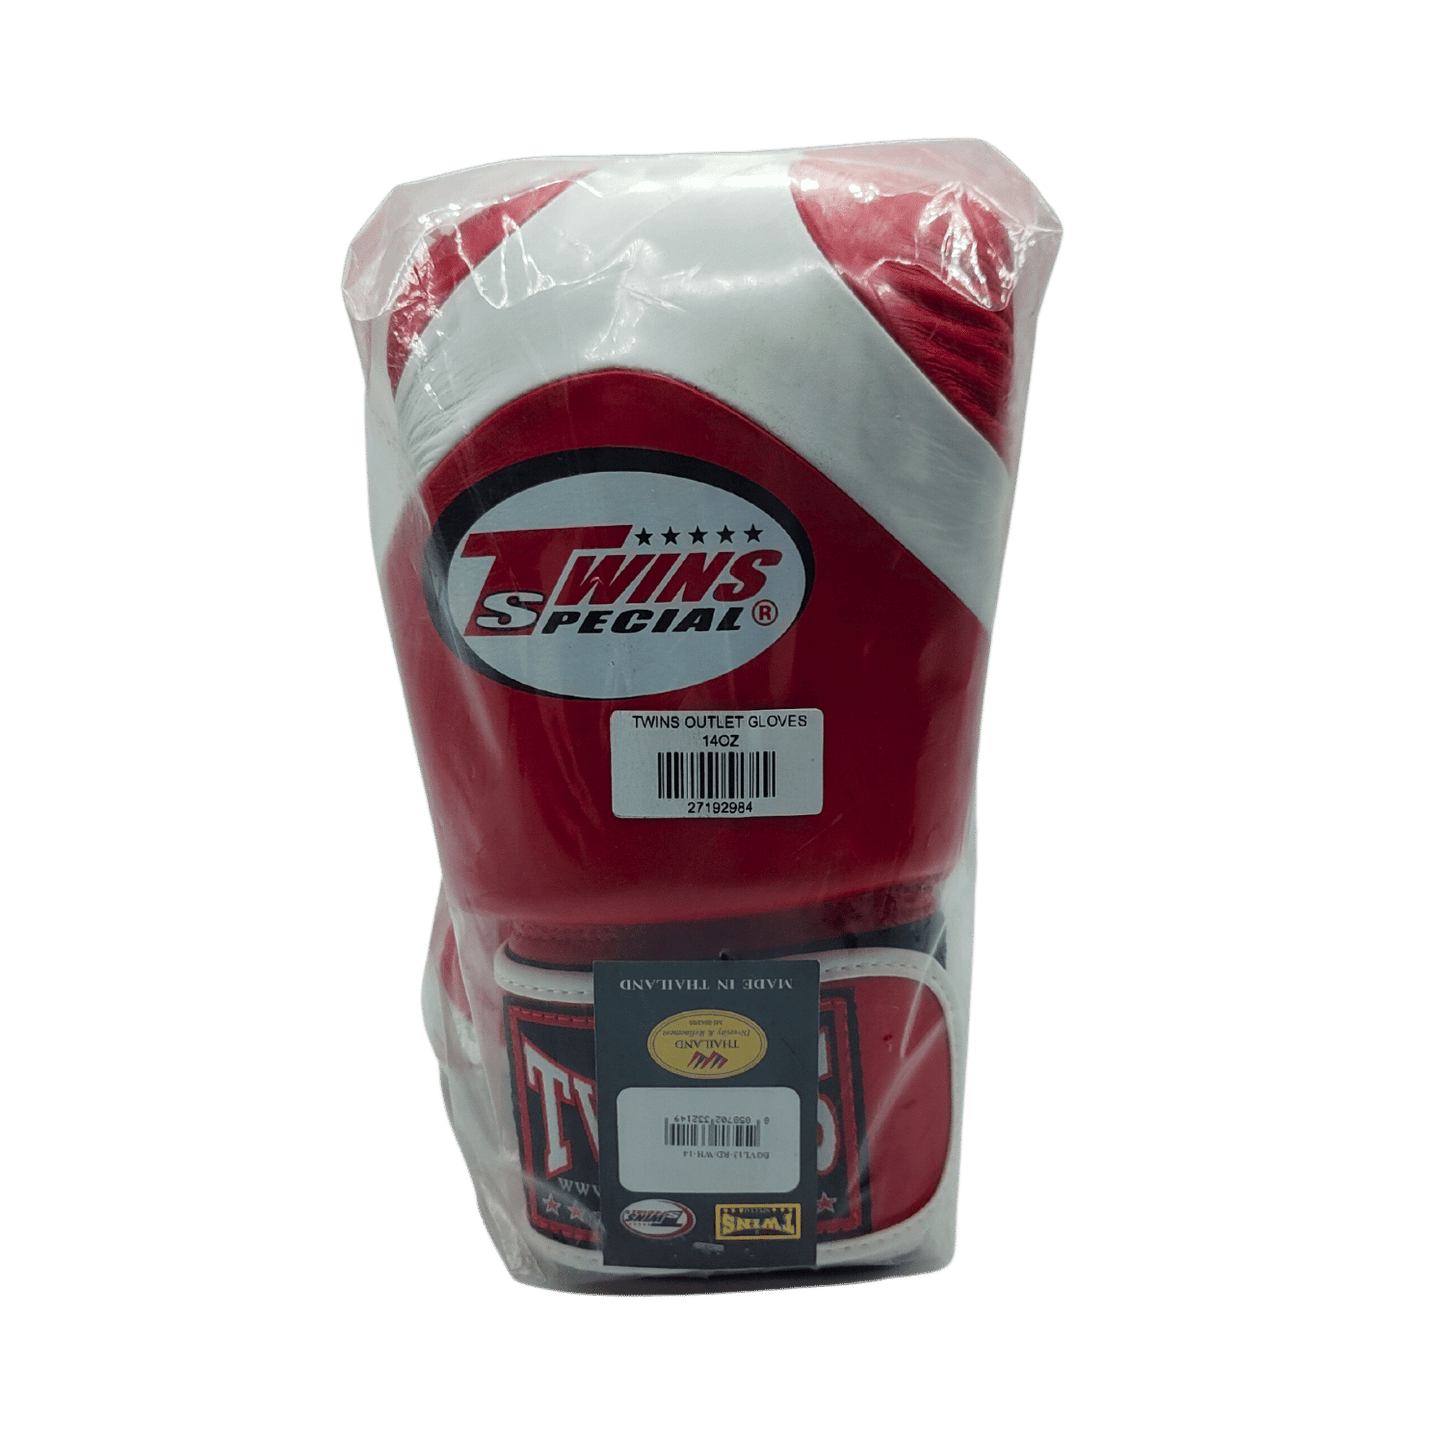 A pair of Twins Duo Colour 14oz Boxing Gloves in a package, perfect for Al's Gym or Muay Thai enthusiasts.